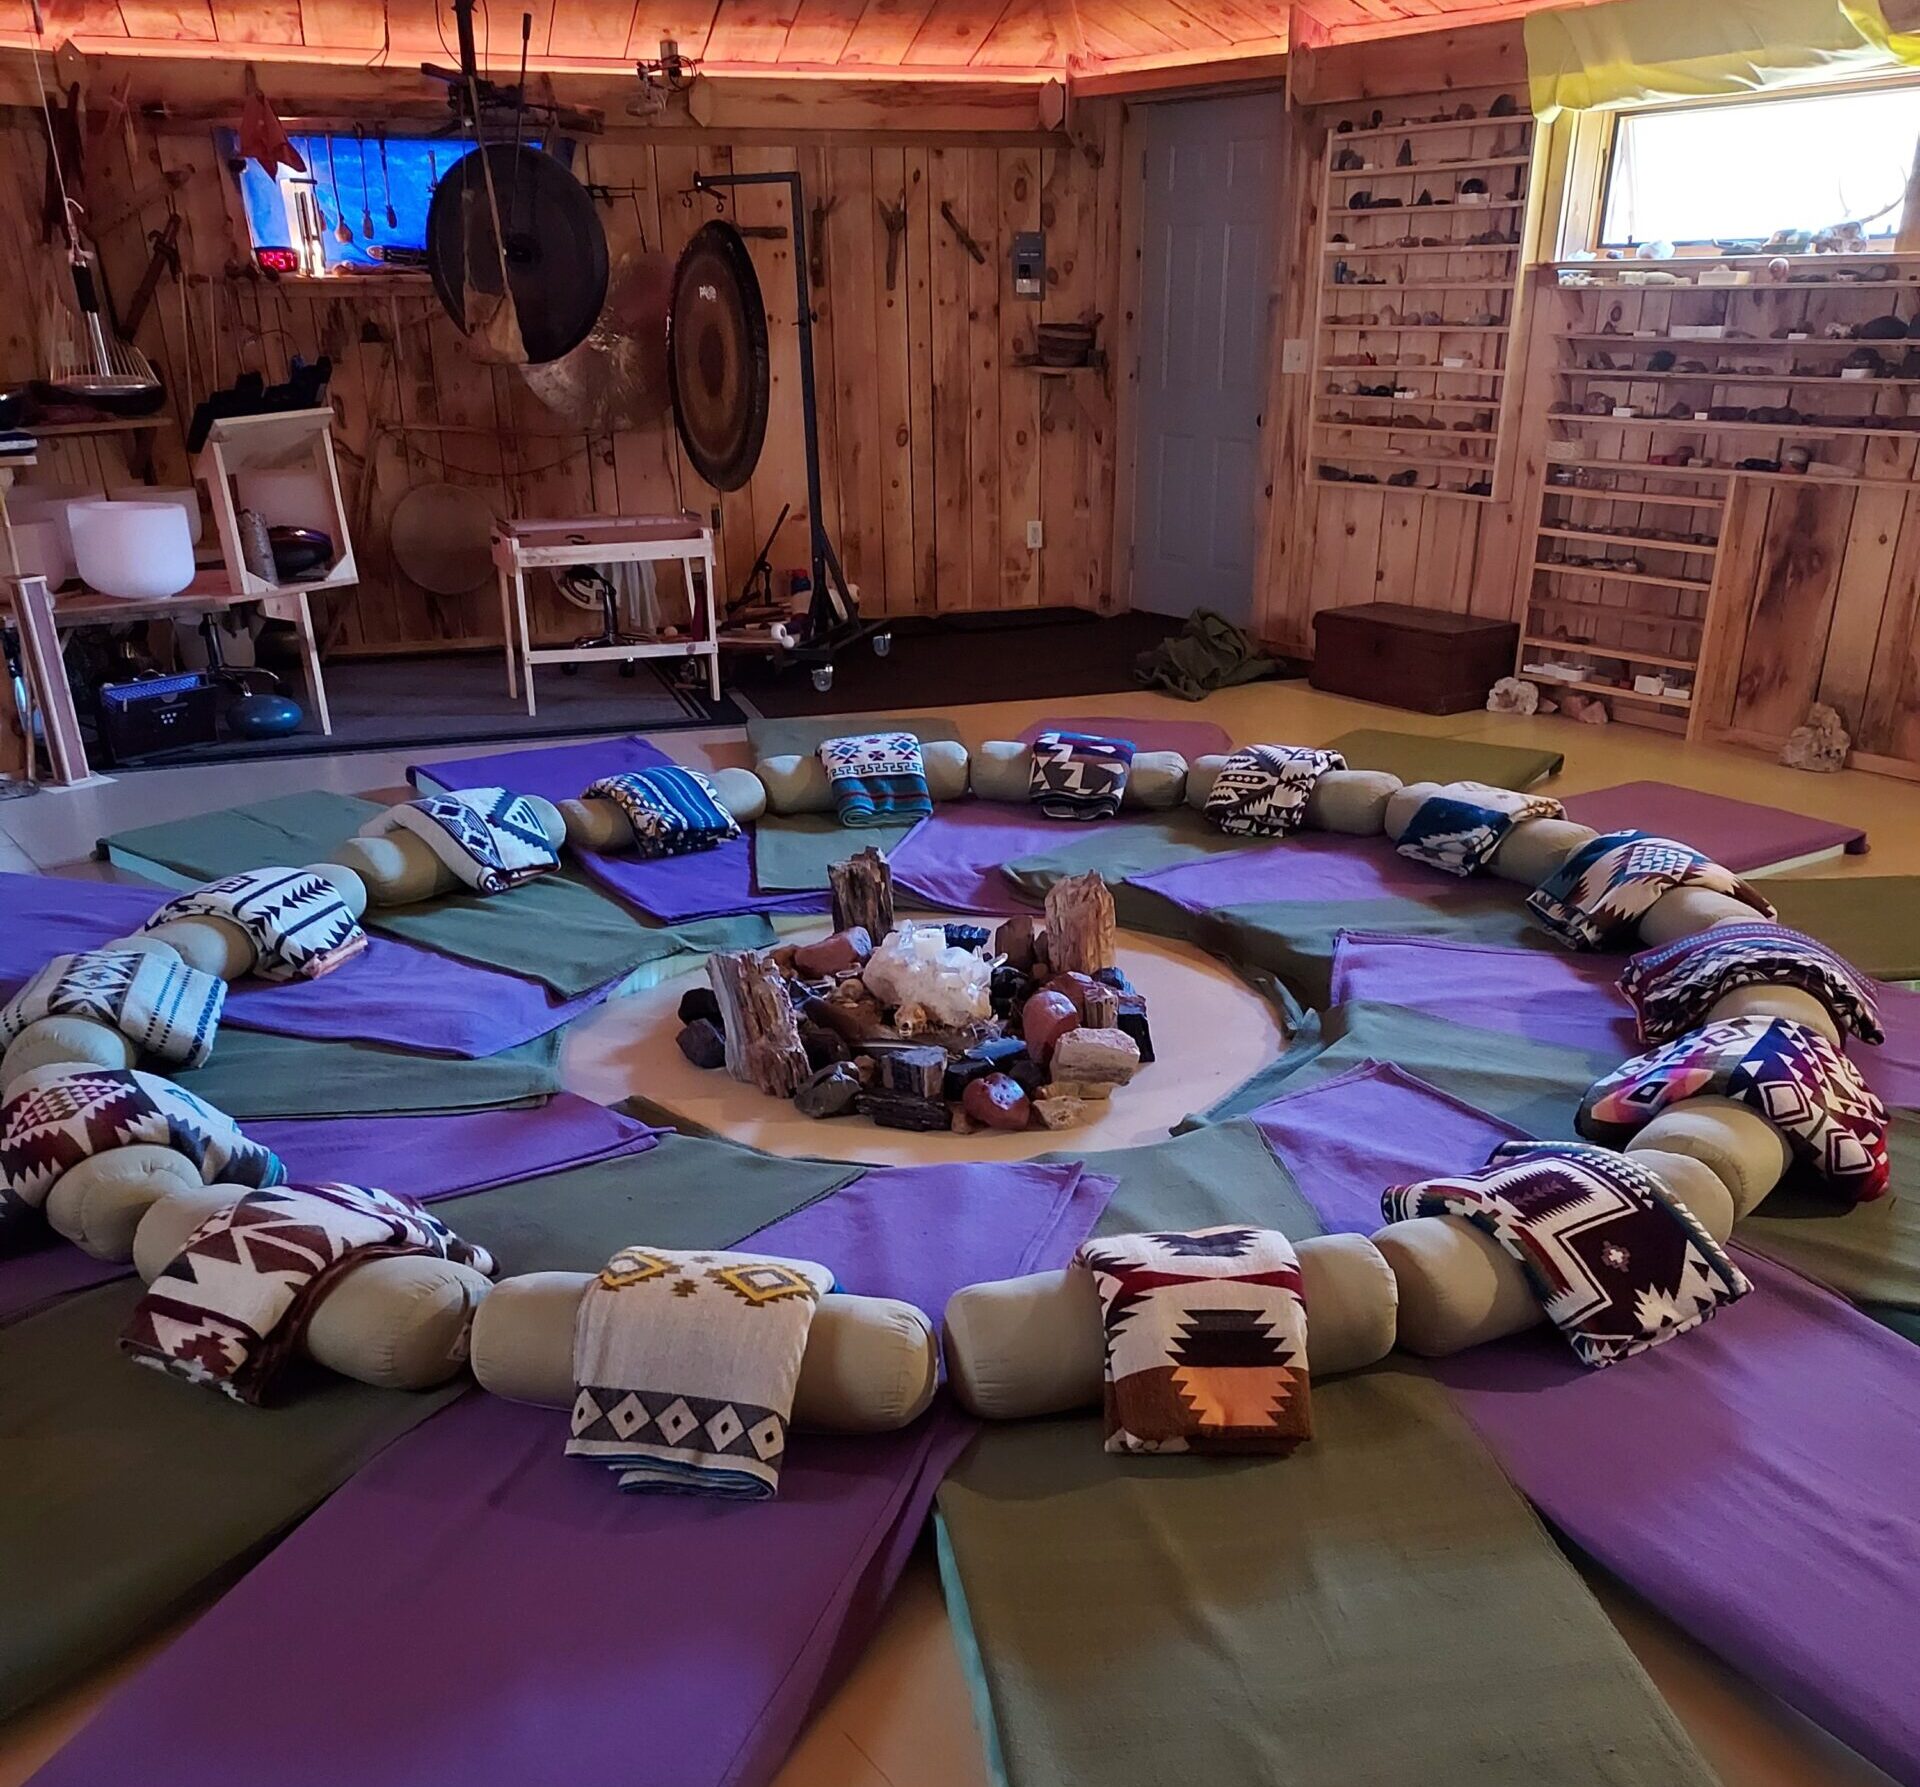 A peaceful circle of floor mats with blankets surrounded by sound meditation instruments and crystals